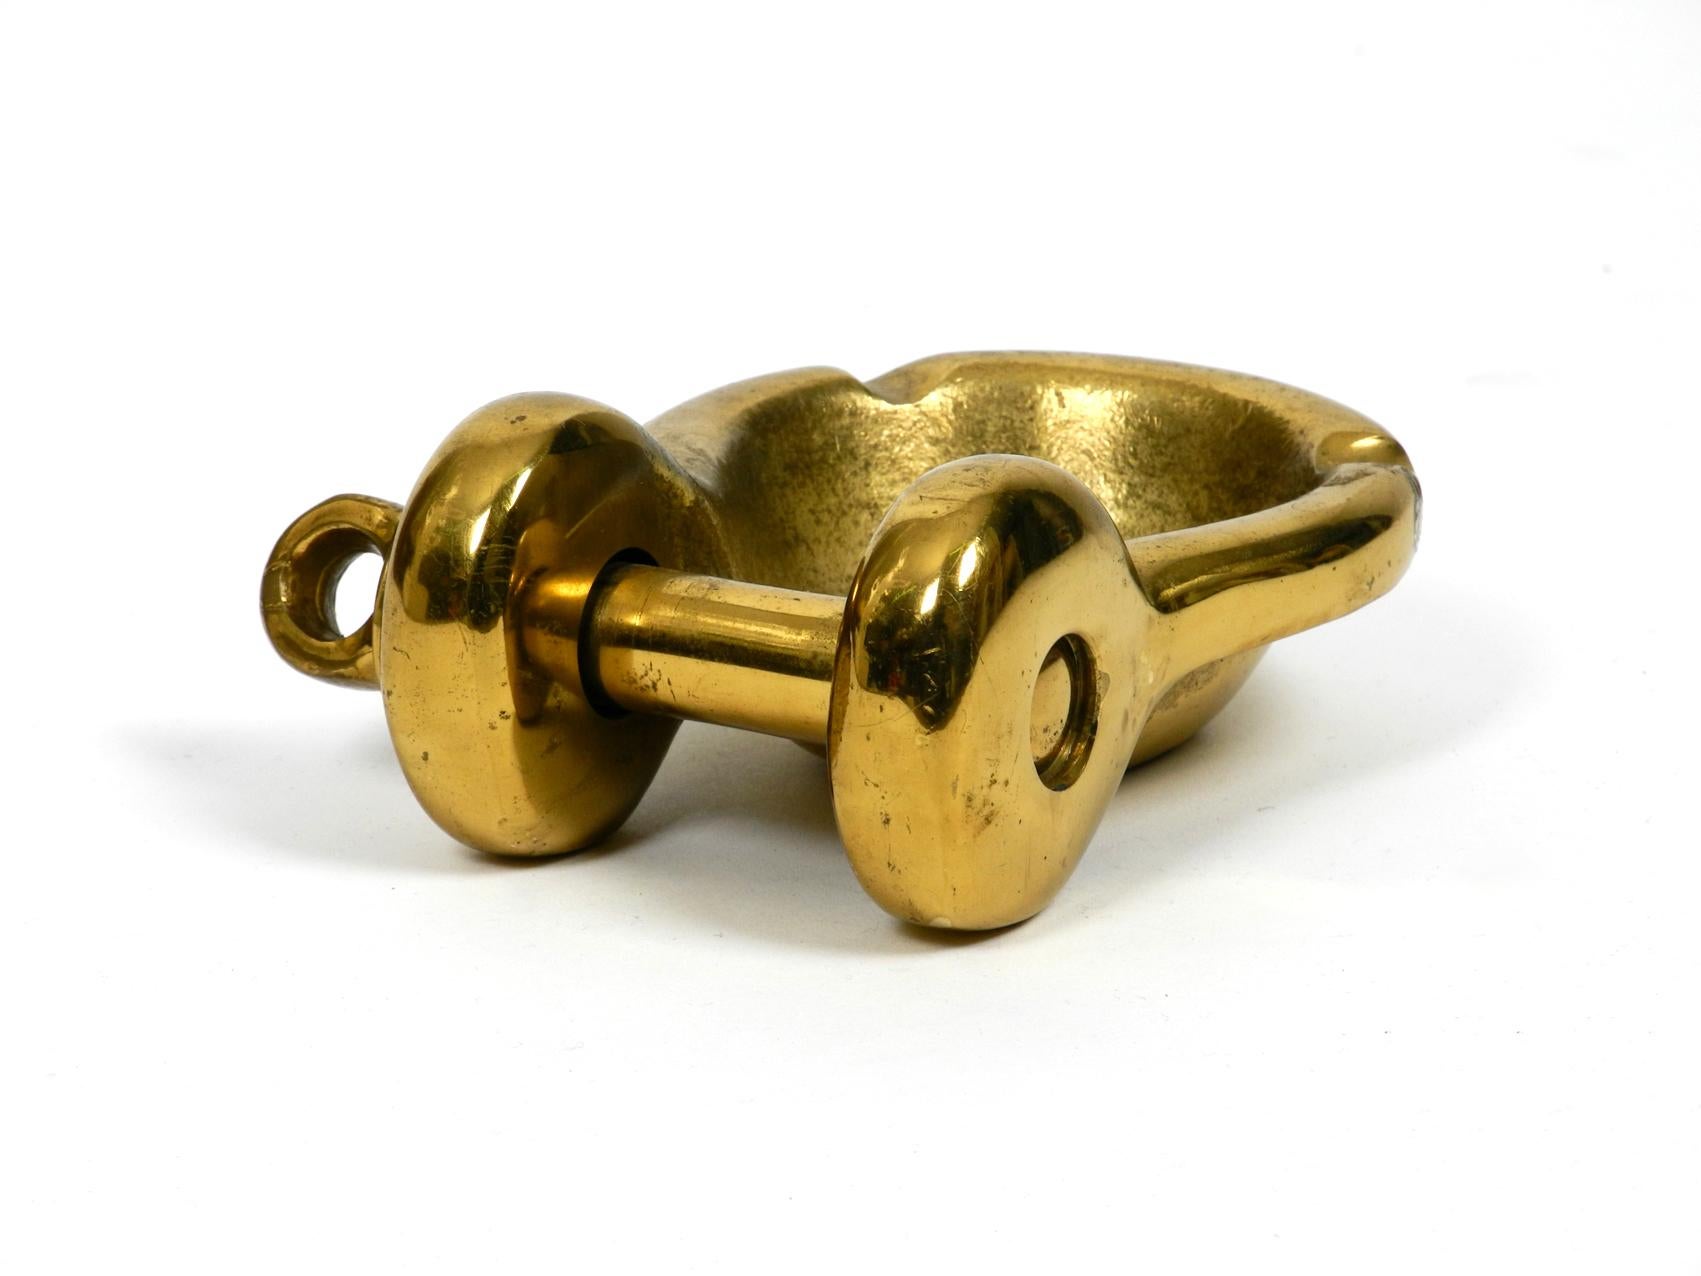 Mid-Century Modern Heavy Midcentury Brass Ashtray in the Shape of a Ship's Shackle